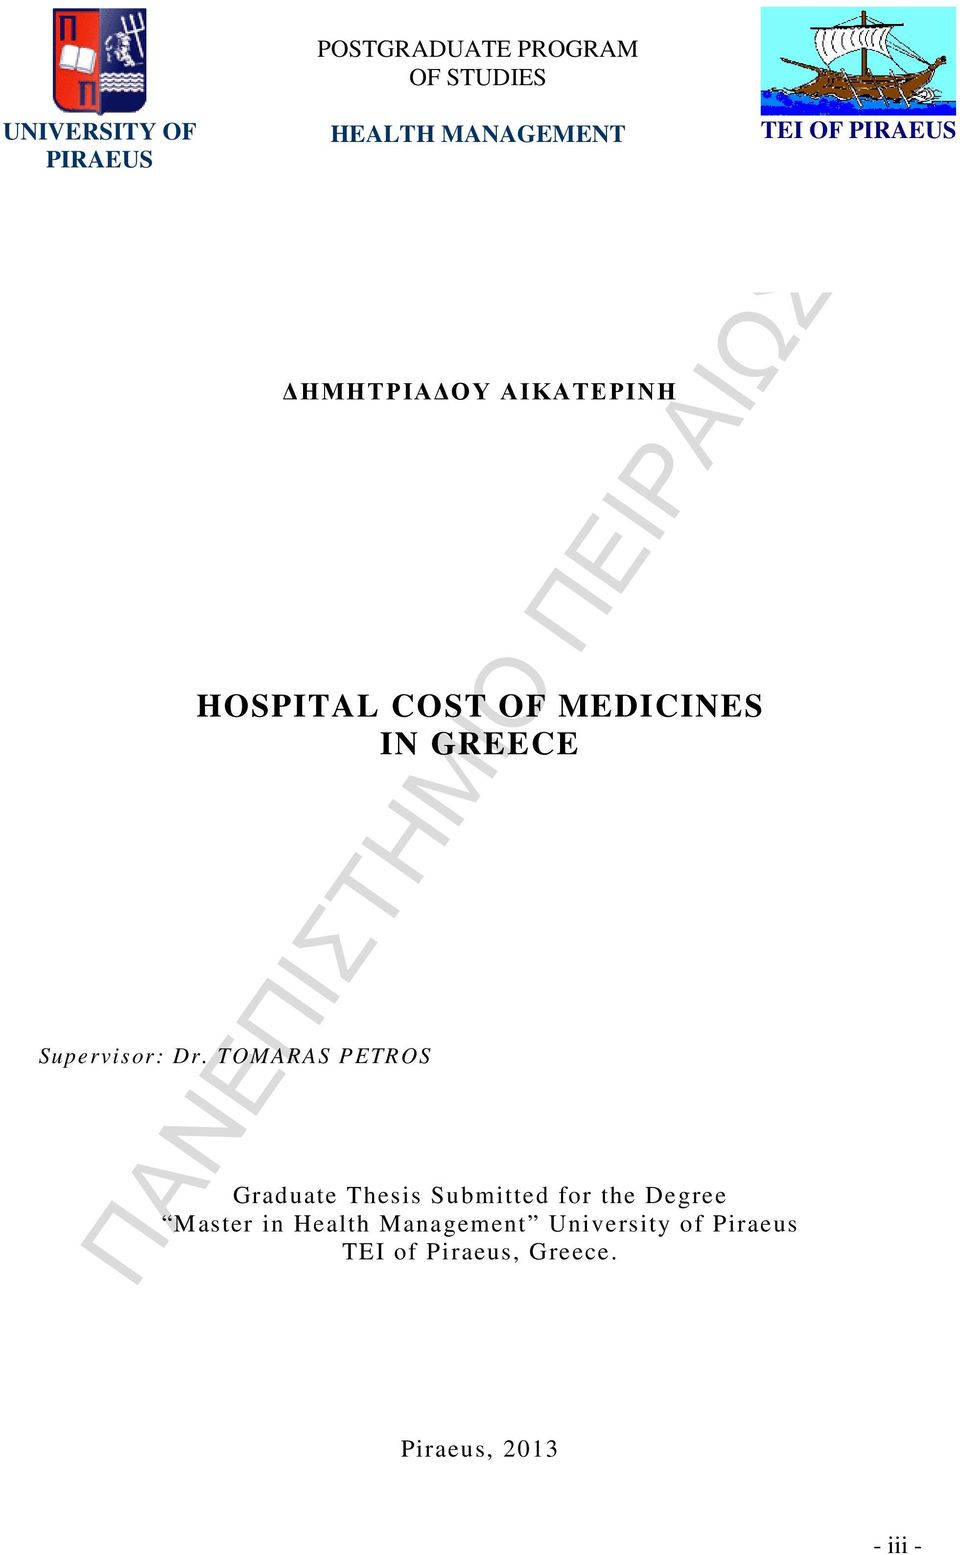 Dr. TOMARAS PETROS Graduate Thesis Submitted for the Degree Master in Health